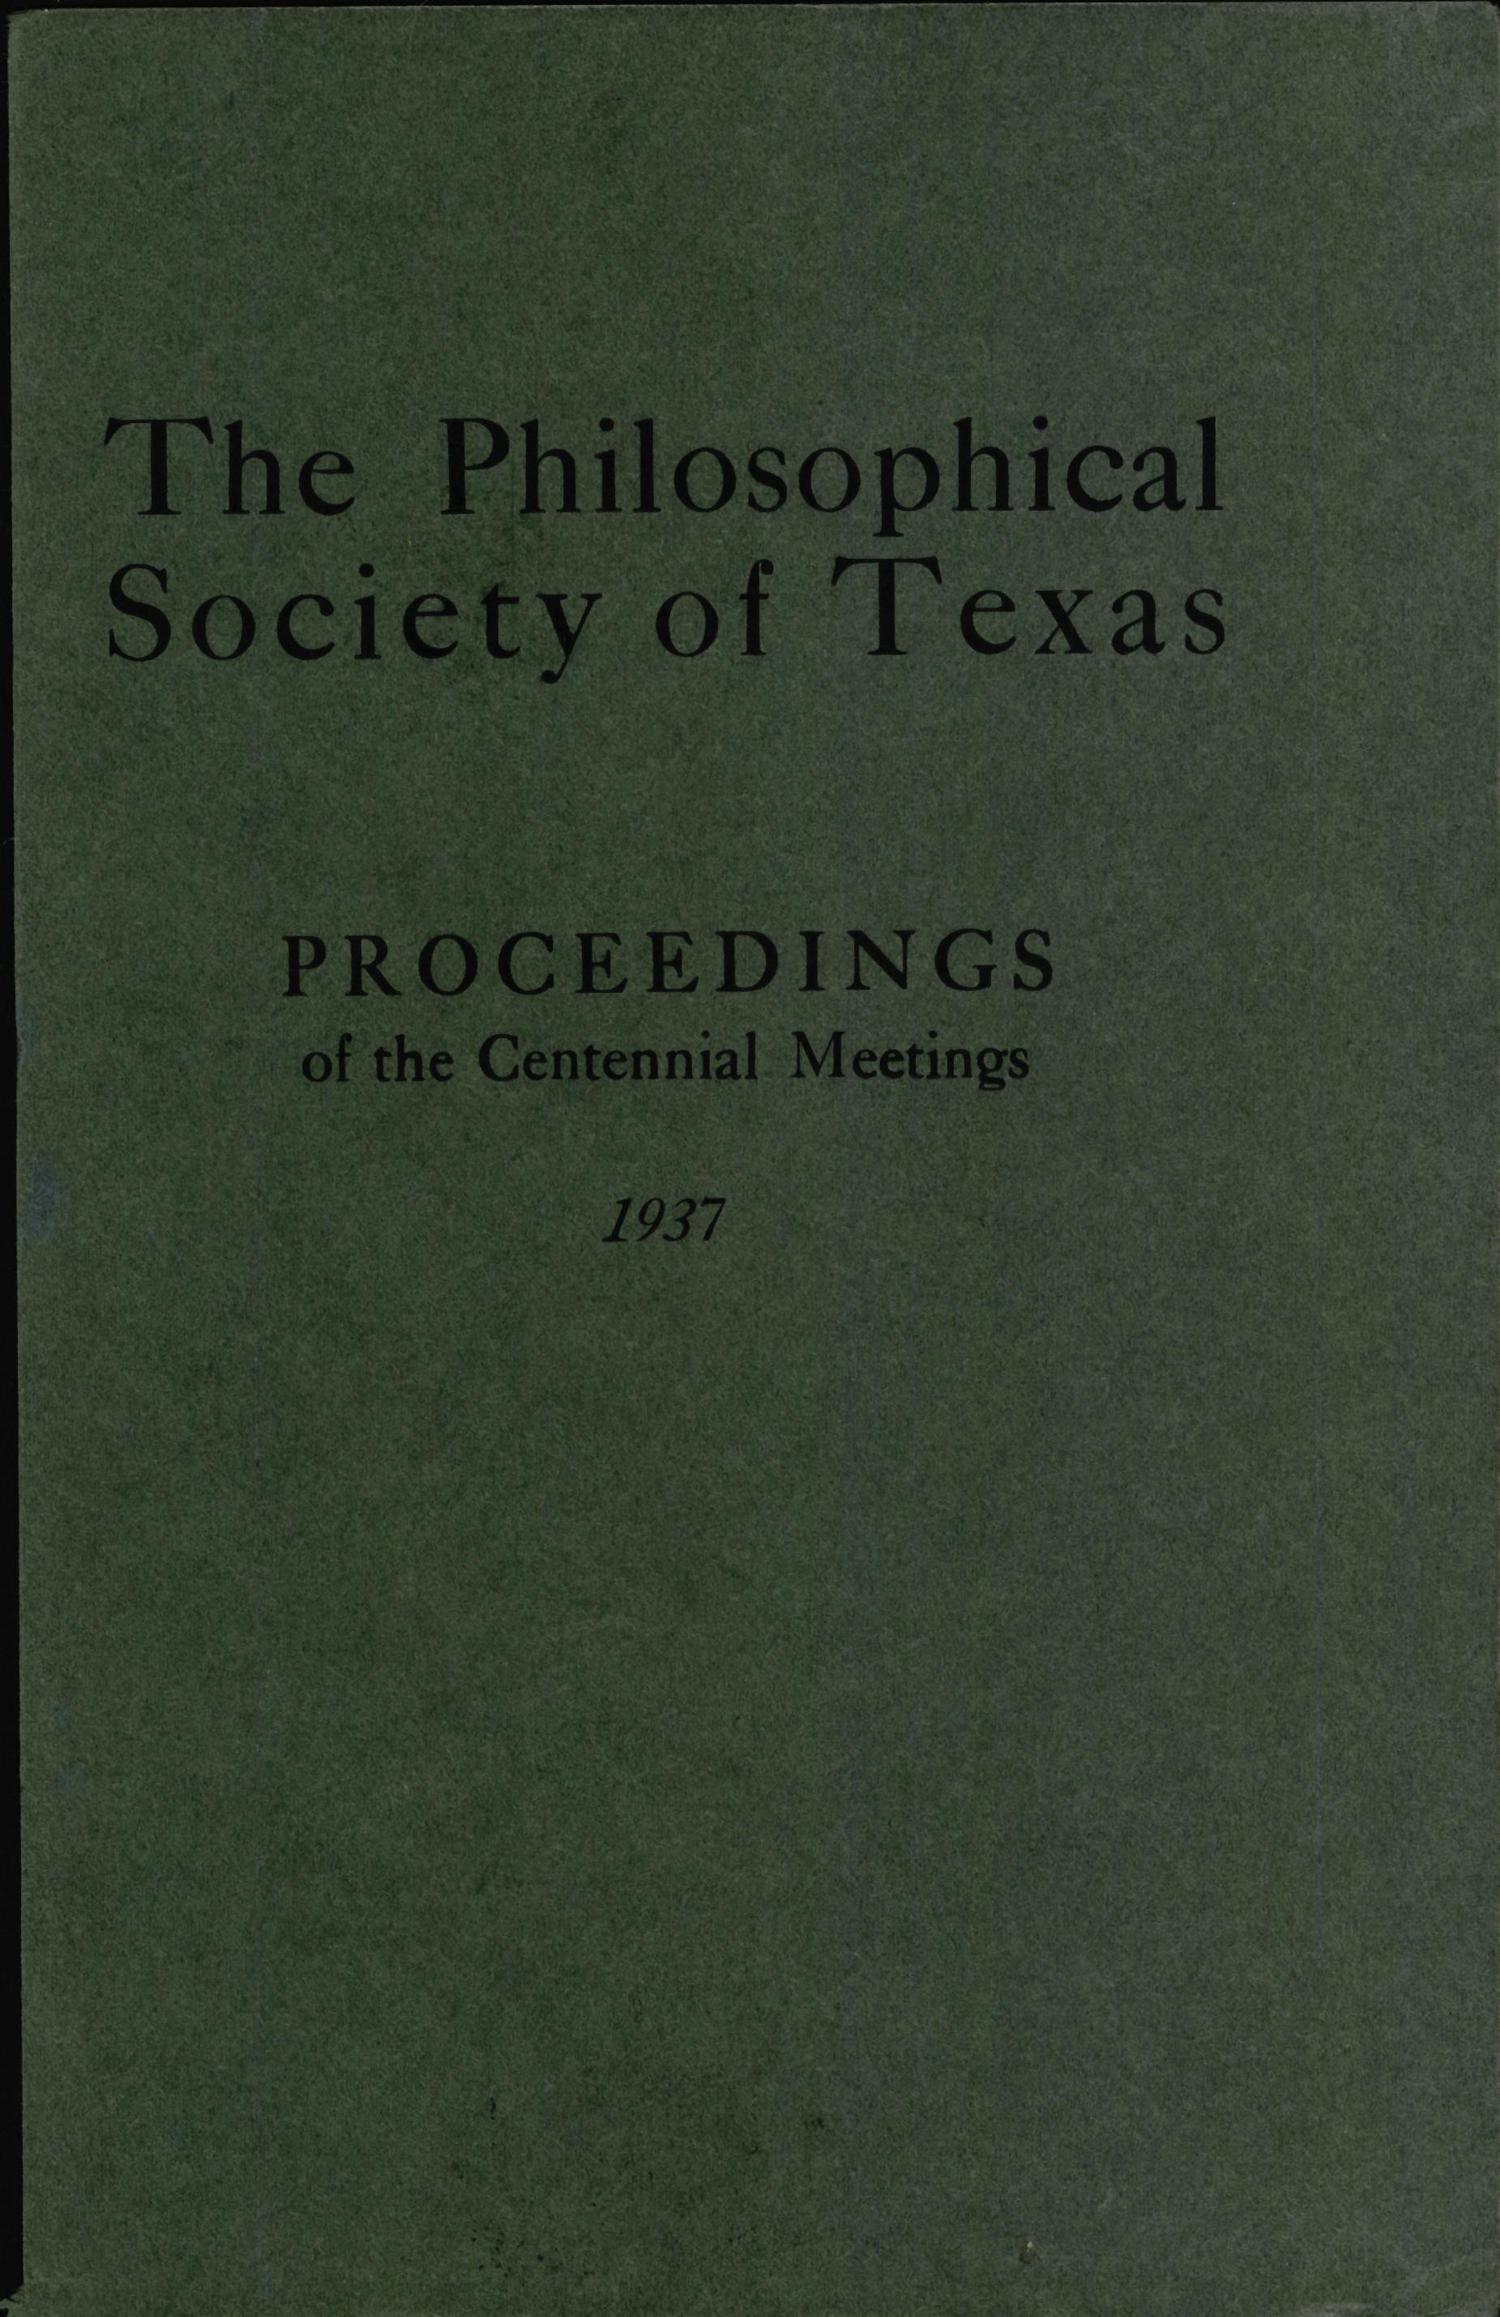 Philosophical Society of Texas, Proceedings of the Annual Meeting: 1937
                                                
                                                    Front Cover
                                                